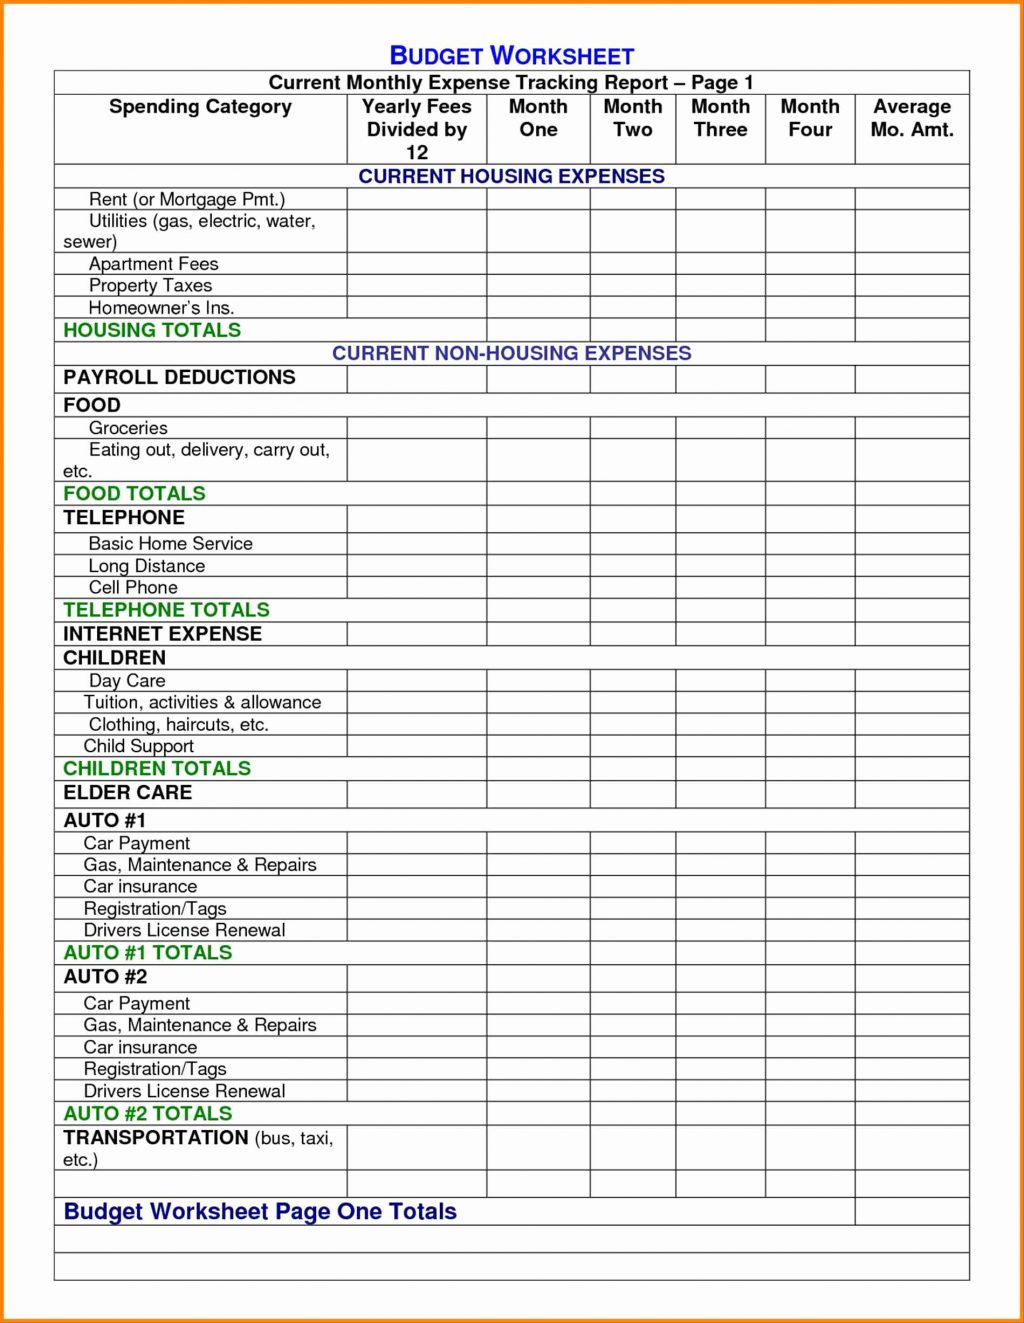 Farm Accounting Spreadsheet Free For Templates Small Business Of and Accounting Spreadsheet Template For Small Business